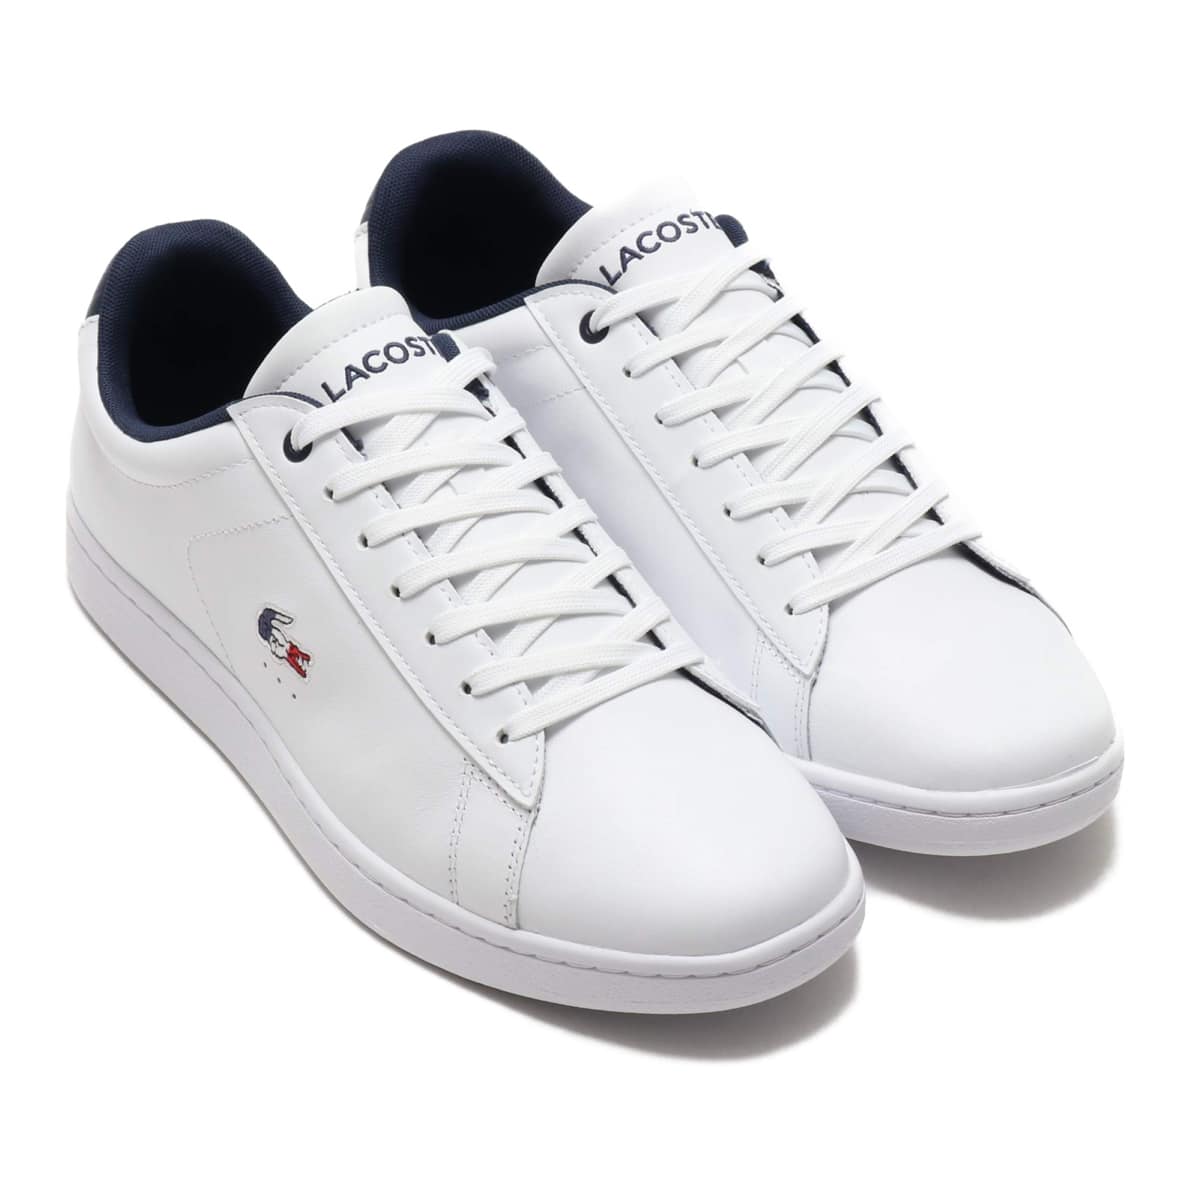 LACOSTE CARNABY EVO 119 7 WHT/NVY/RED 